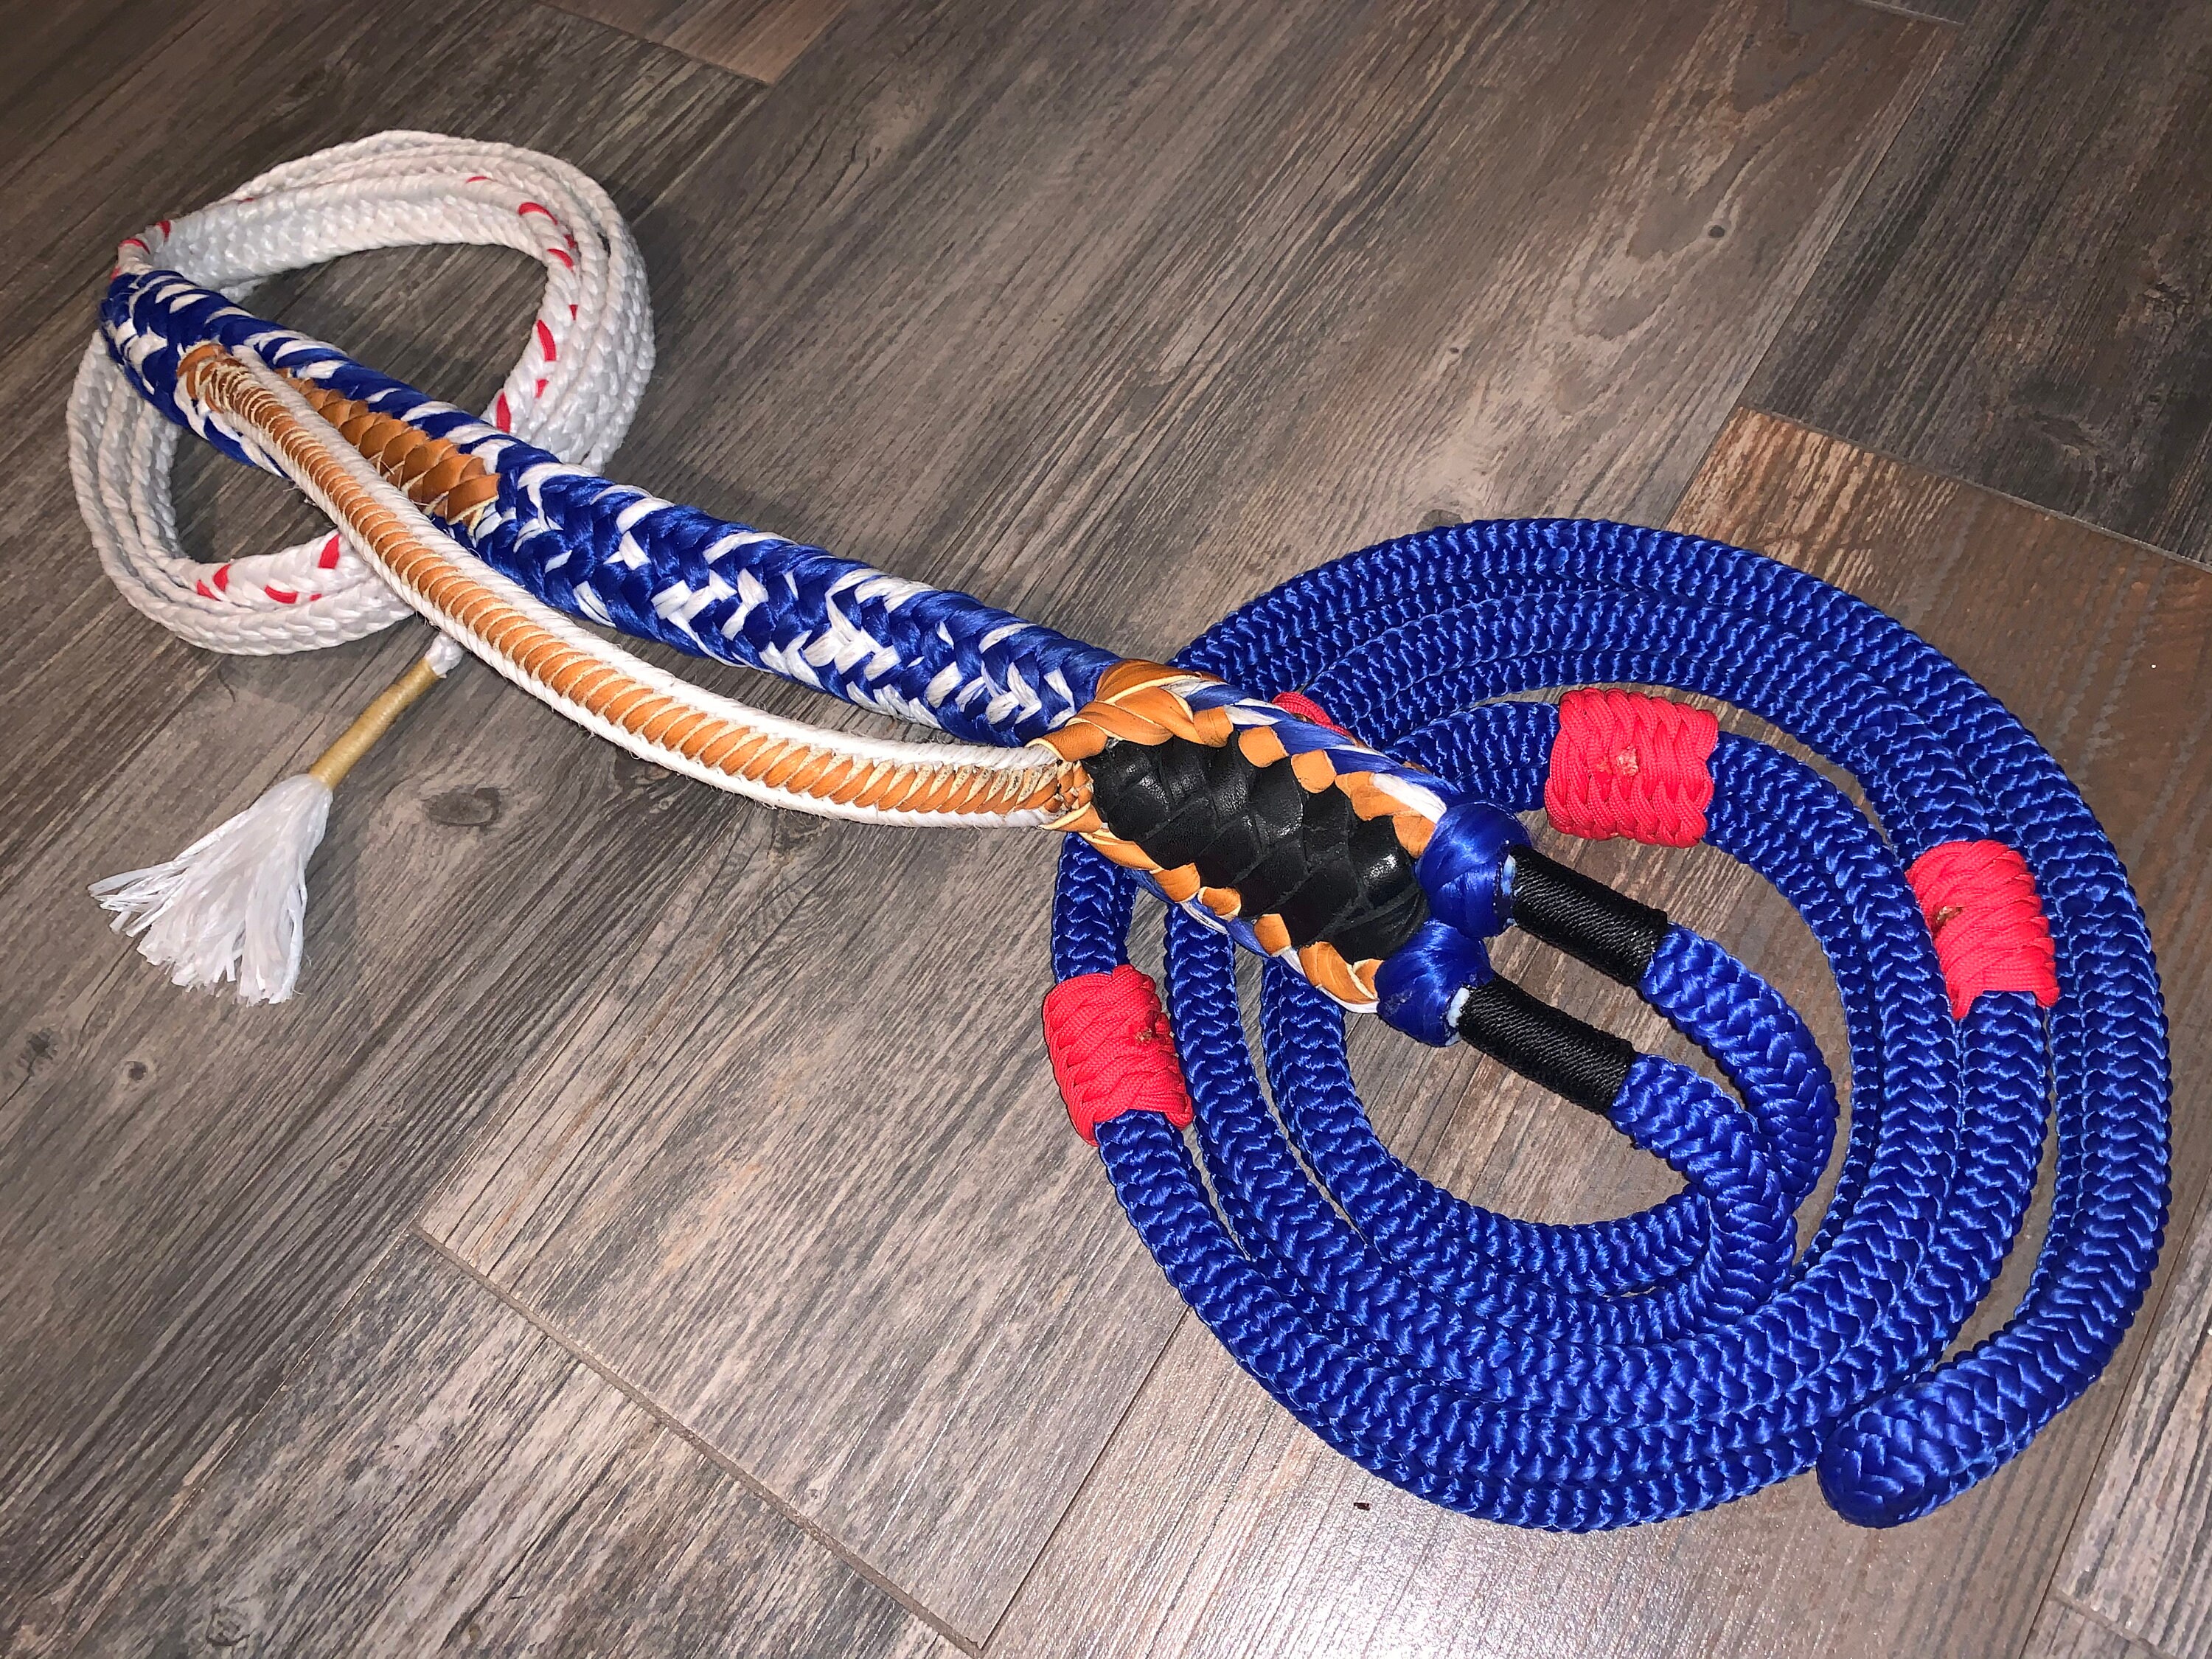 The Patriot Rope - EPT Signature Blue On White Poly Pro 9/7 LH Soft 3/4 x 3/4 Bull Riding Rodeo 16'